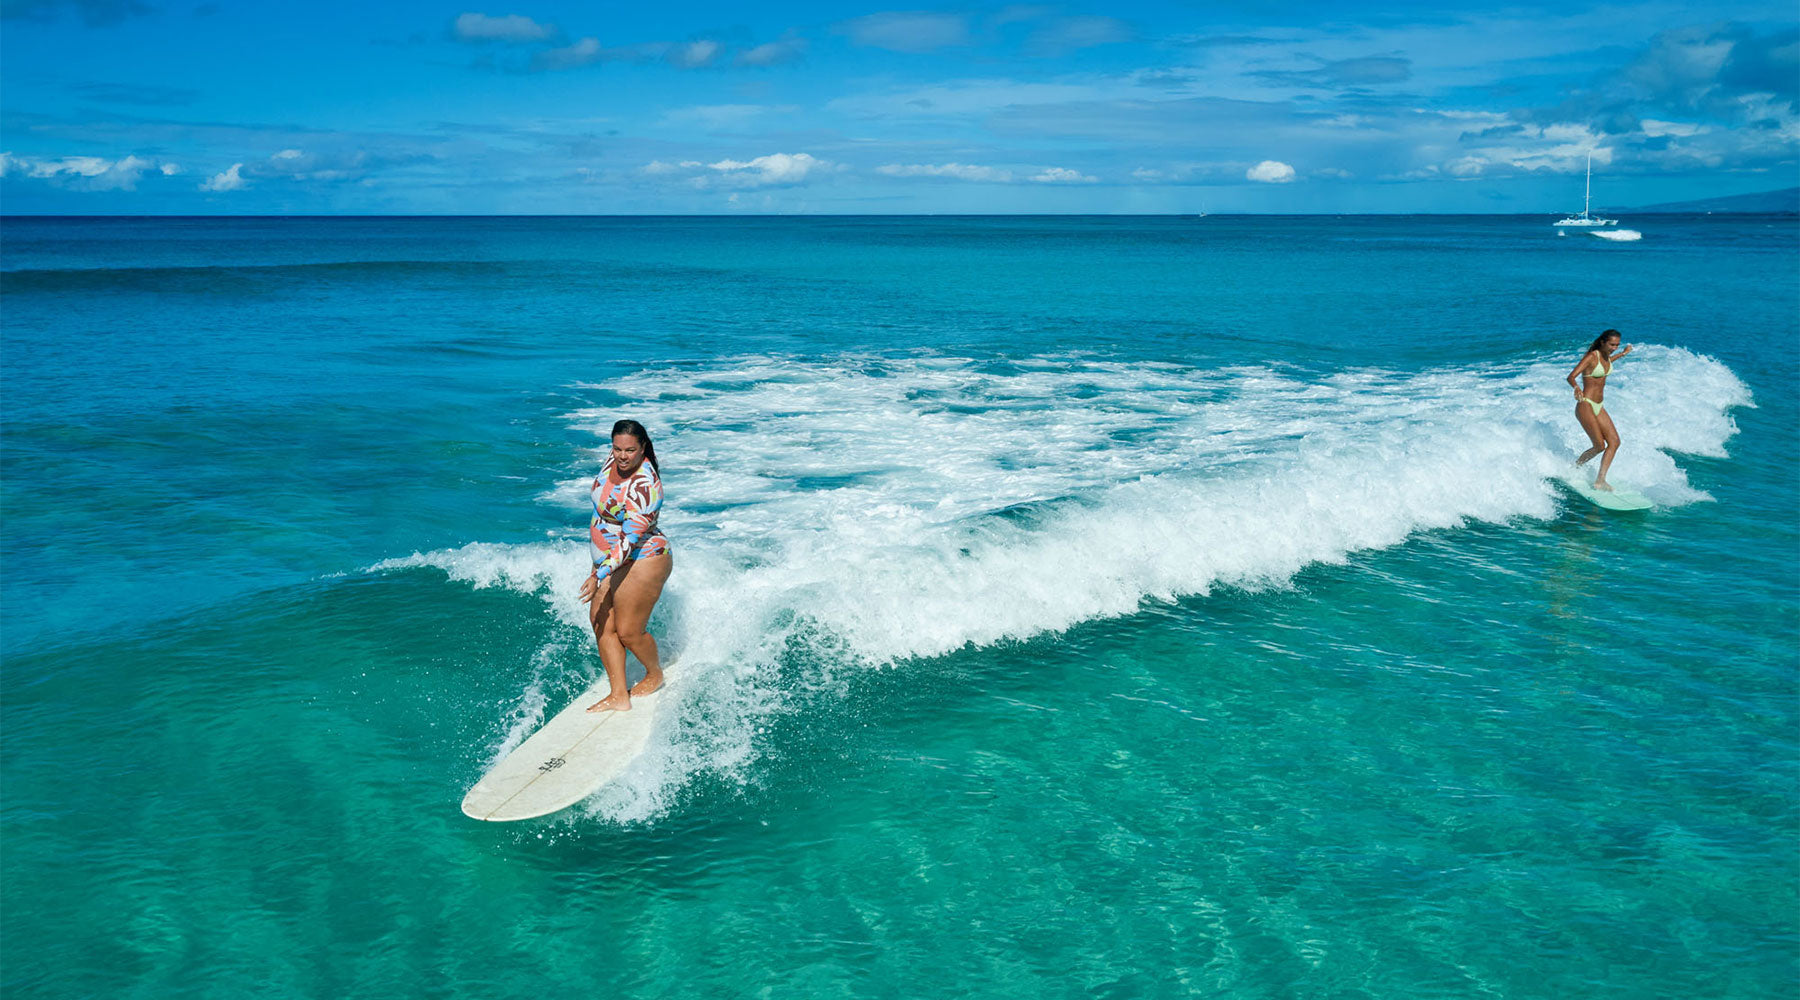 Girls surfing together on a wave wearing Roxy swimmers